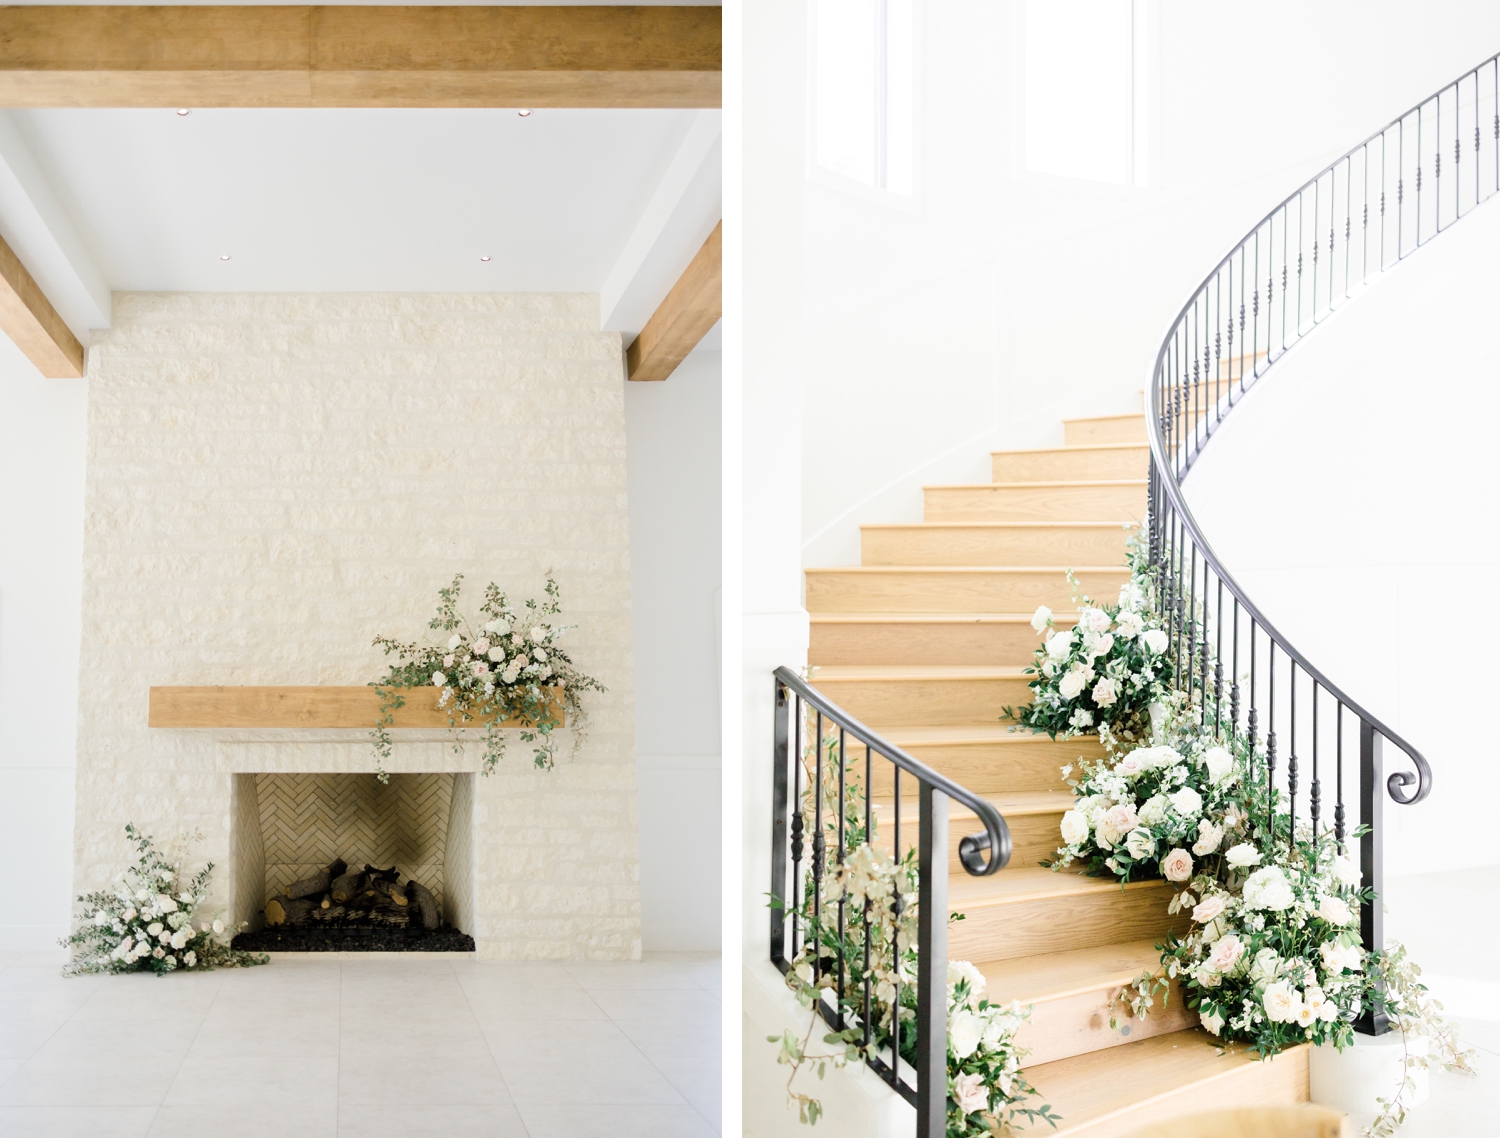 All White Wedding Day Florals and Details | Reiley and Rose | Texas Hill Country Wedding Floral Designer | The Preserve at Canyon Lake | classic wedding, chic wedding, simple wedding, wedding day inspiration | via reileyandrose.com